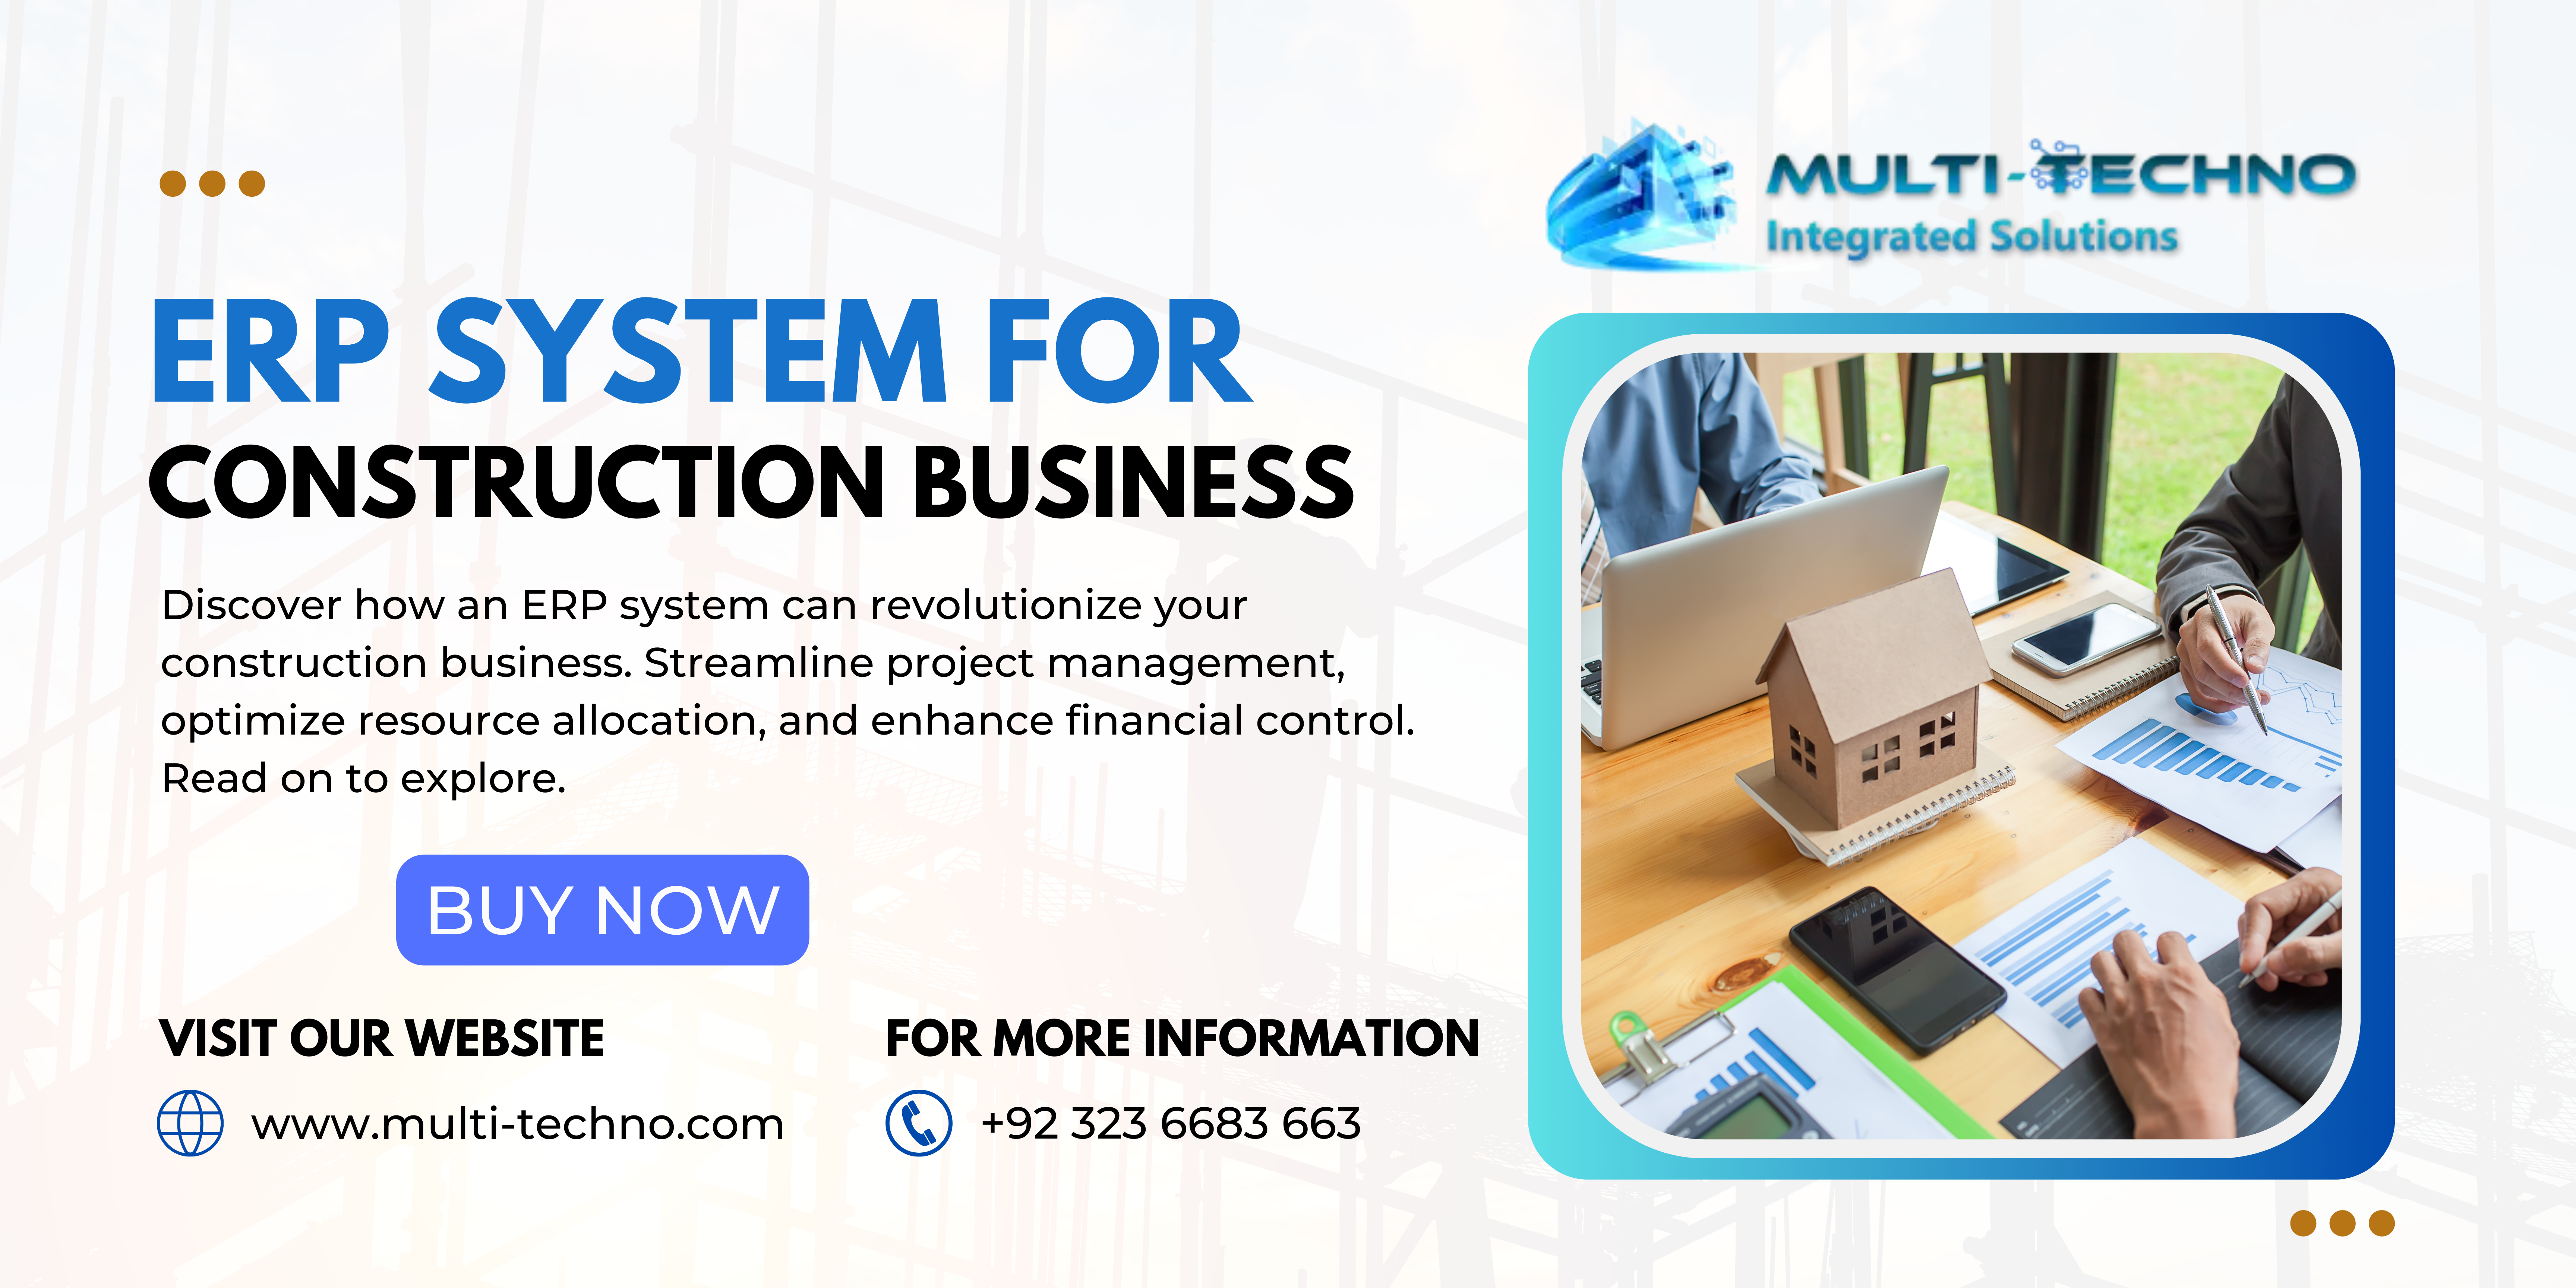 ERP Solutions For Construction Business - Multi-Techno